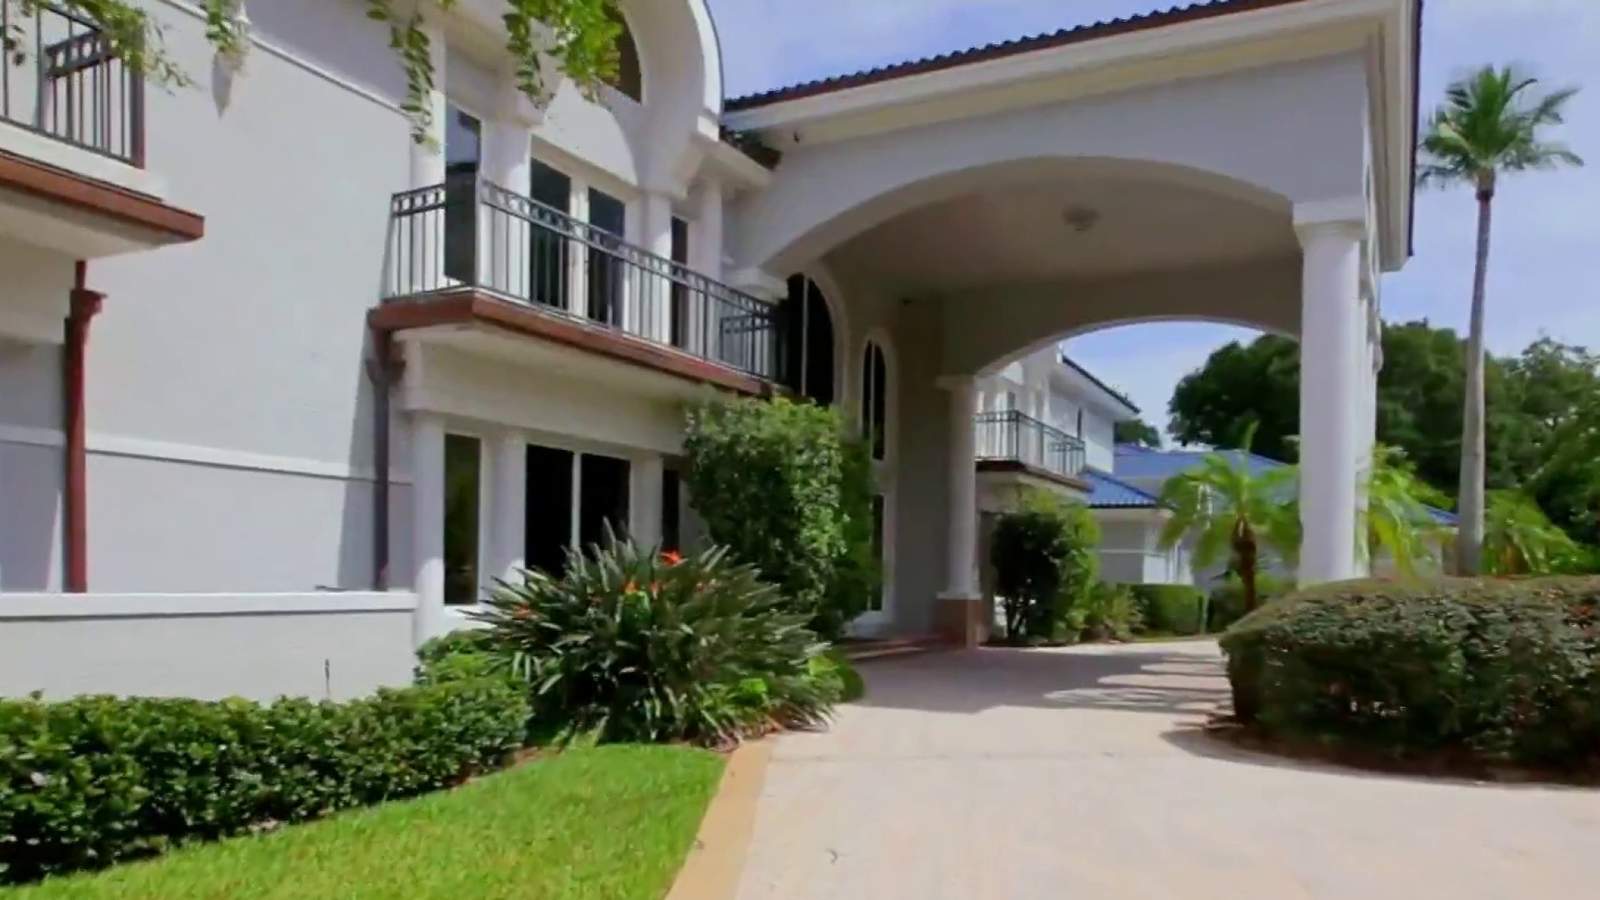 Shaq finally finds buyer for his Isleworth mansion after twice reducing price